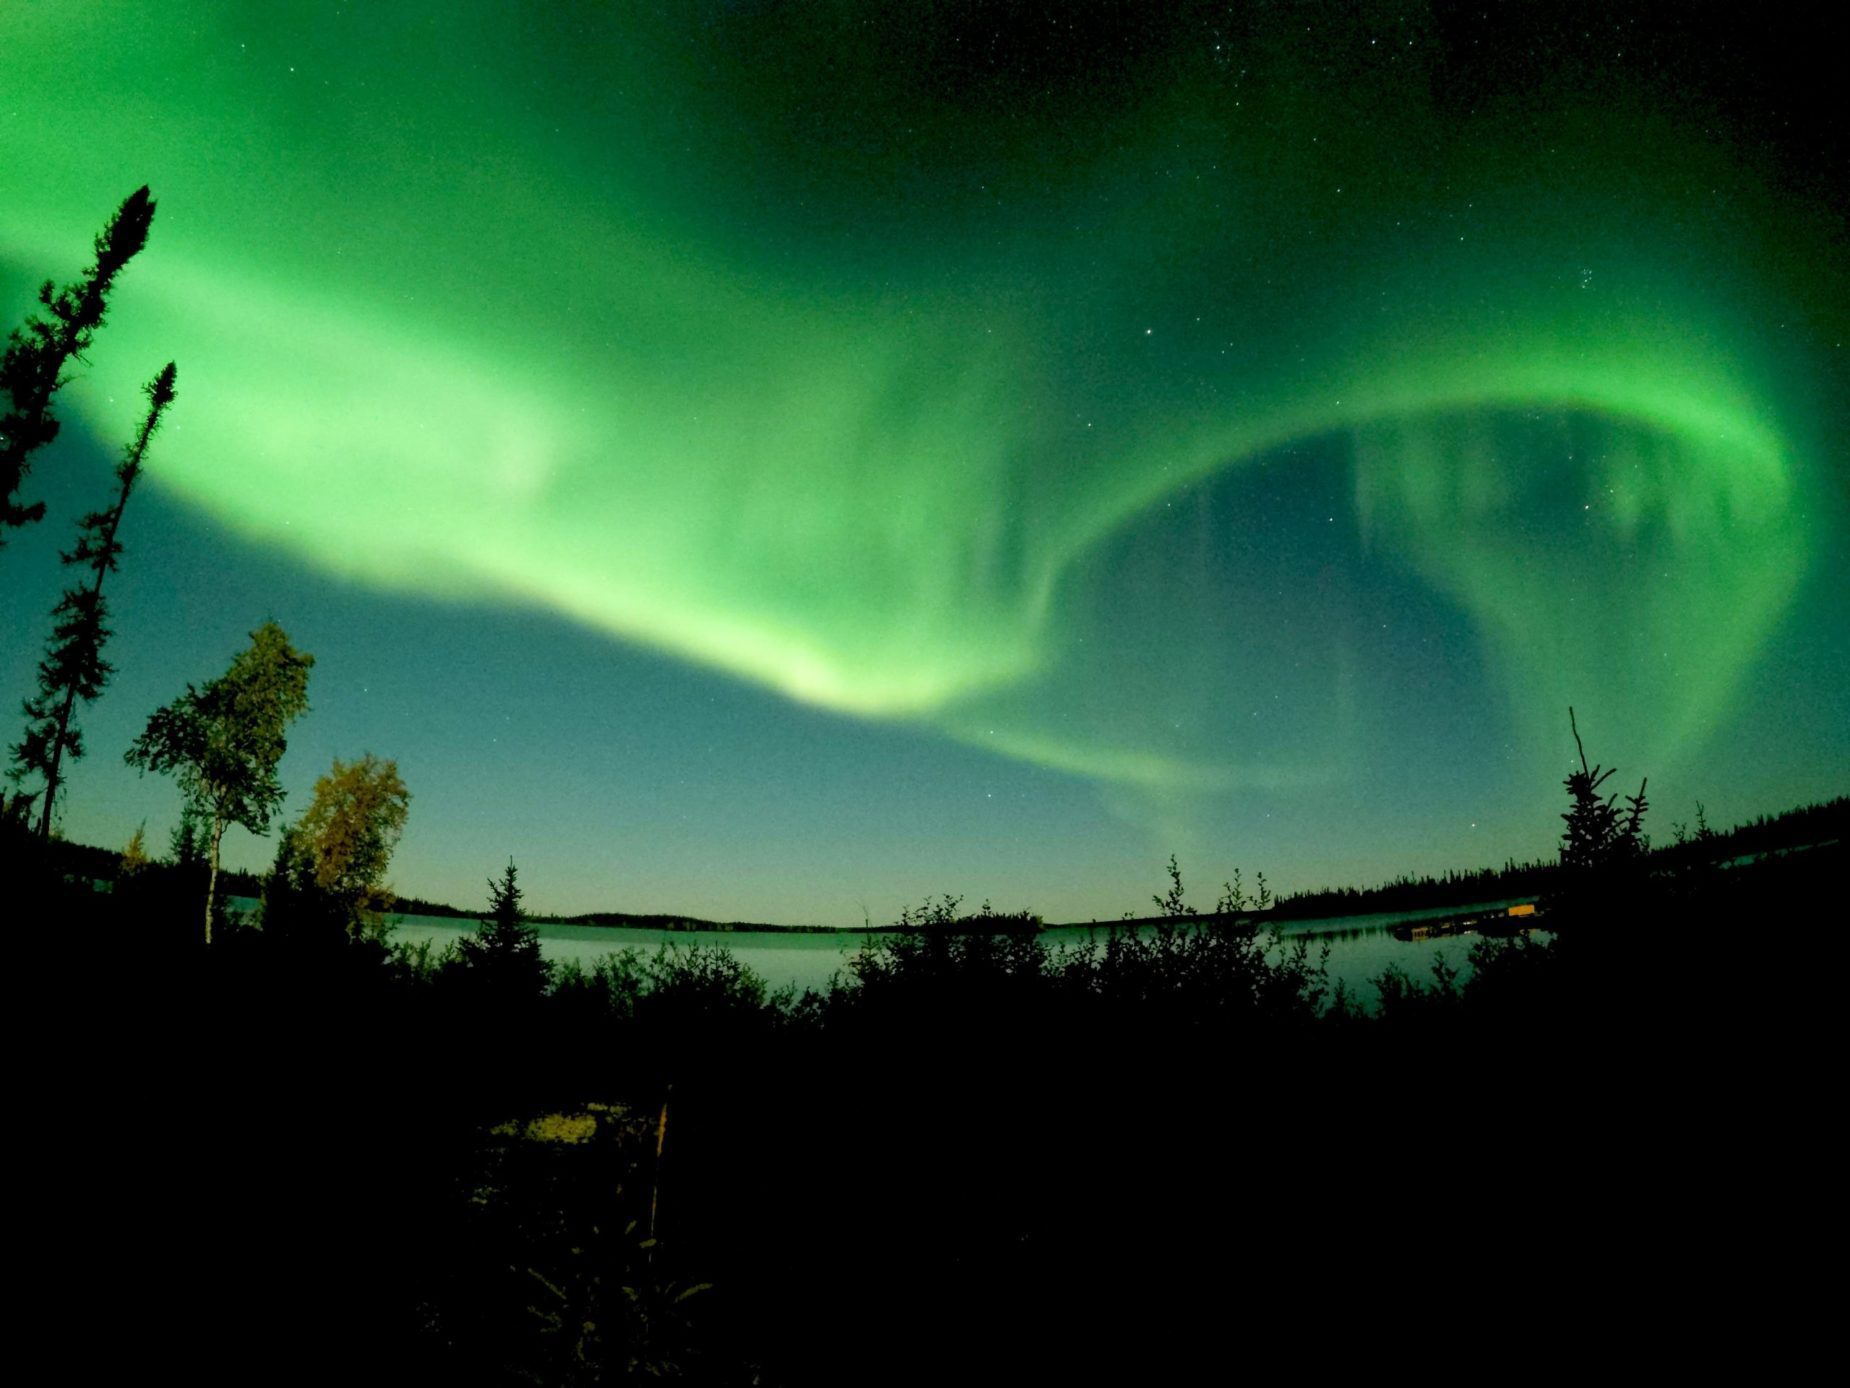 Dark time lapse photograph with the Northern Lights swirling above trees